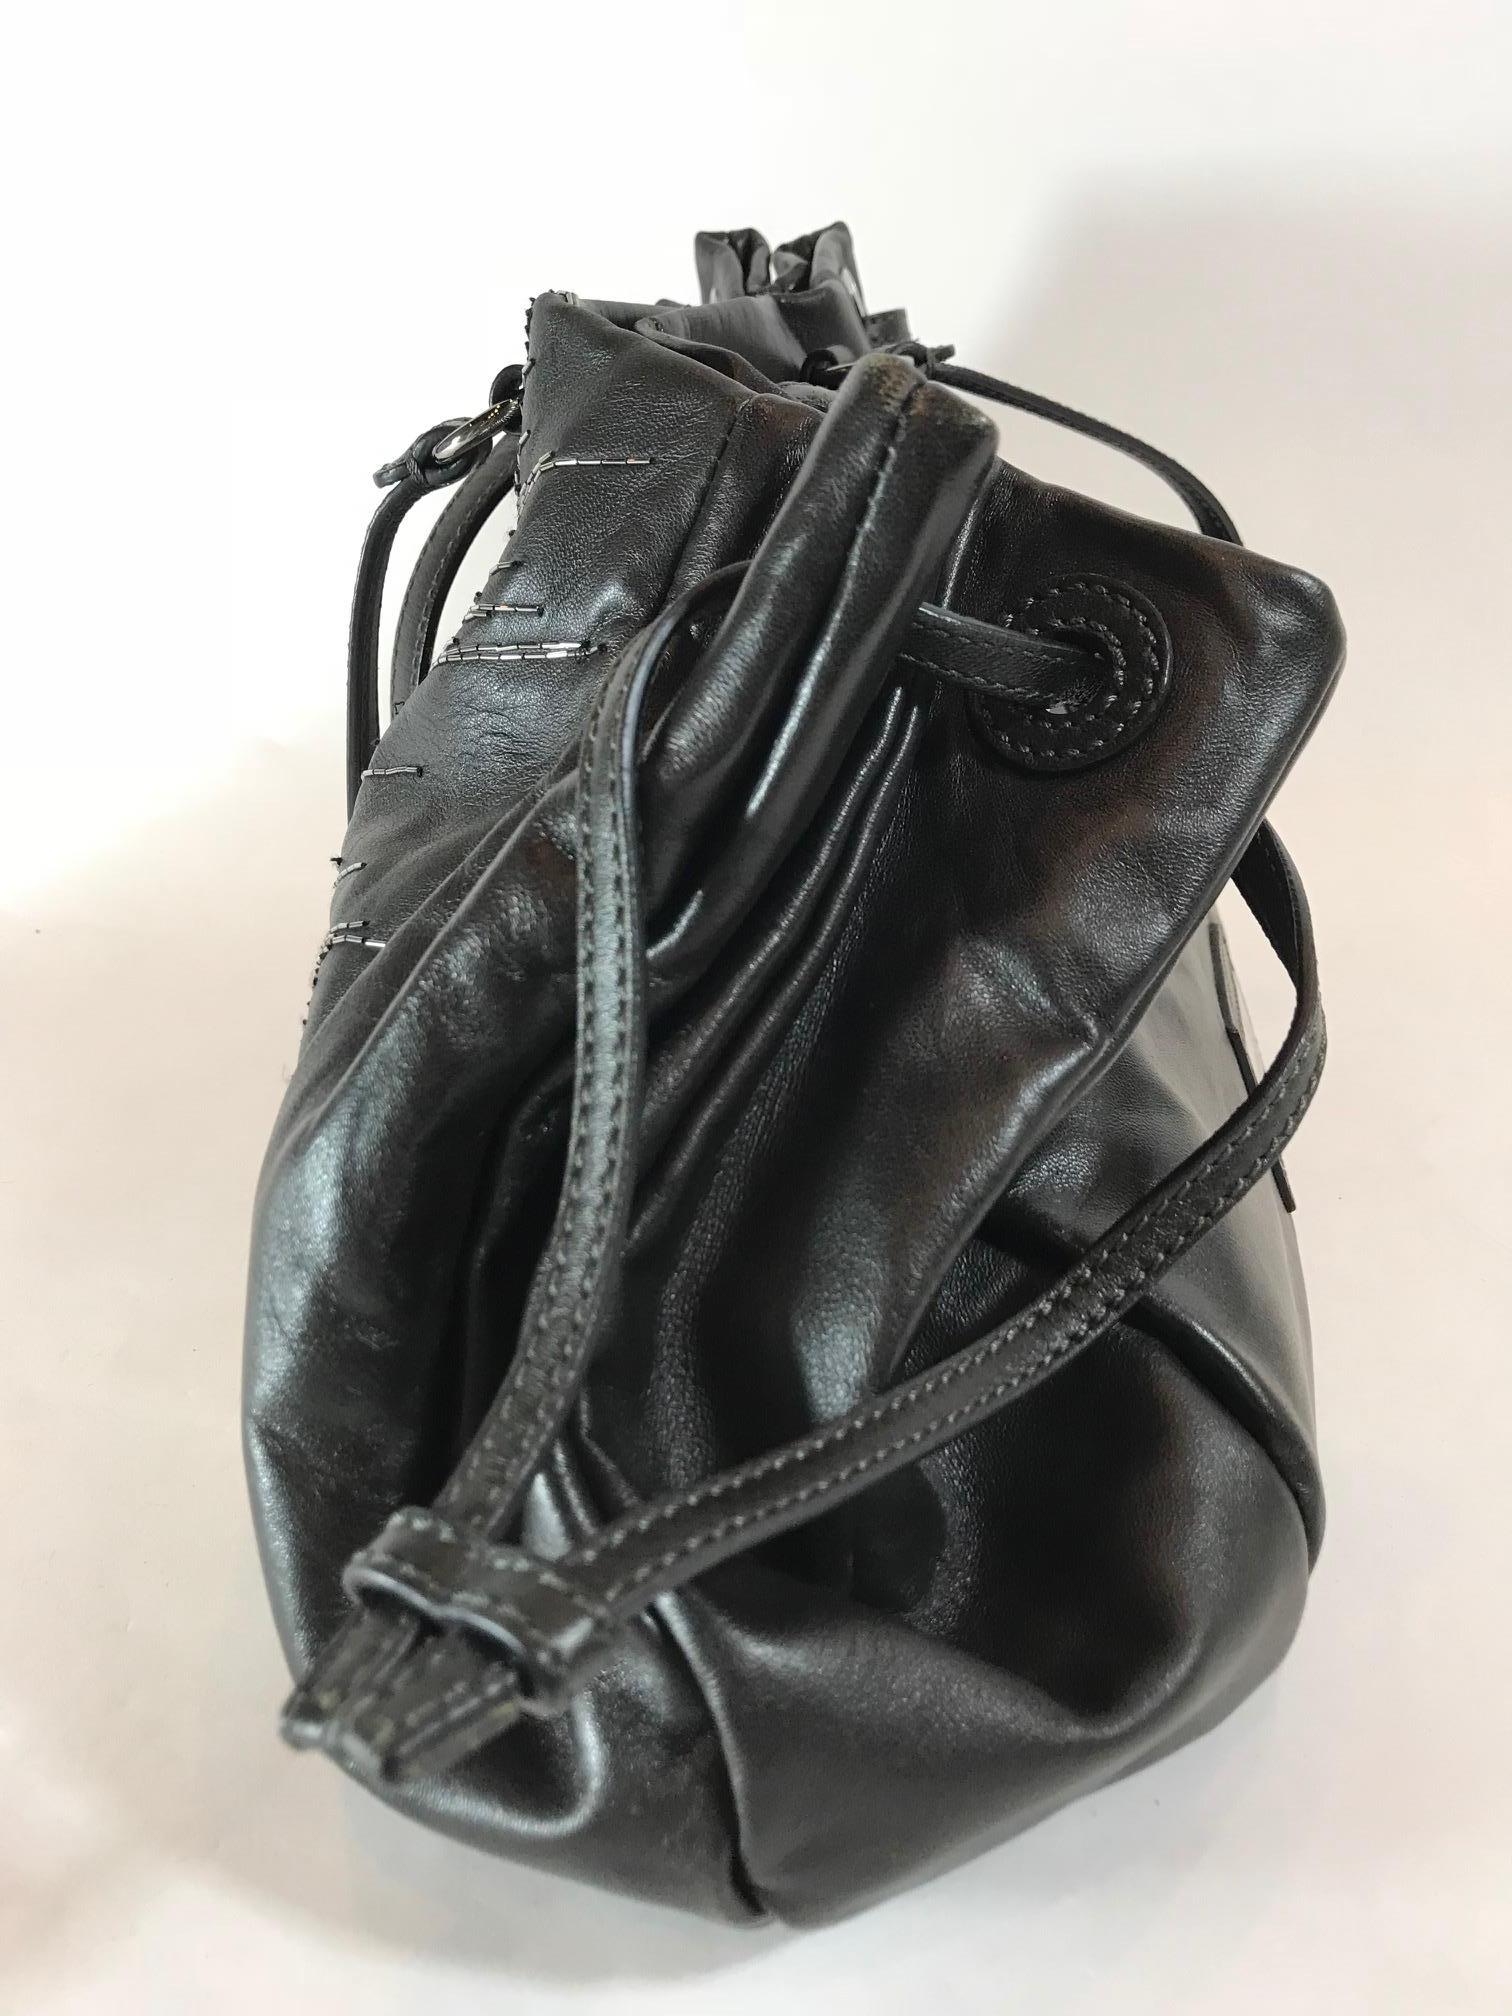 Valentino Metallic Shoulder Bag In Excellent Condition For Sale In Roslyn, NY